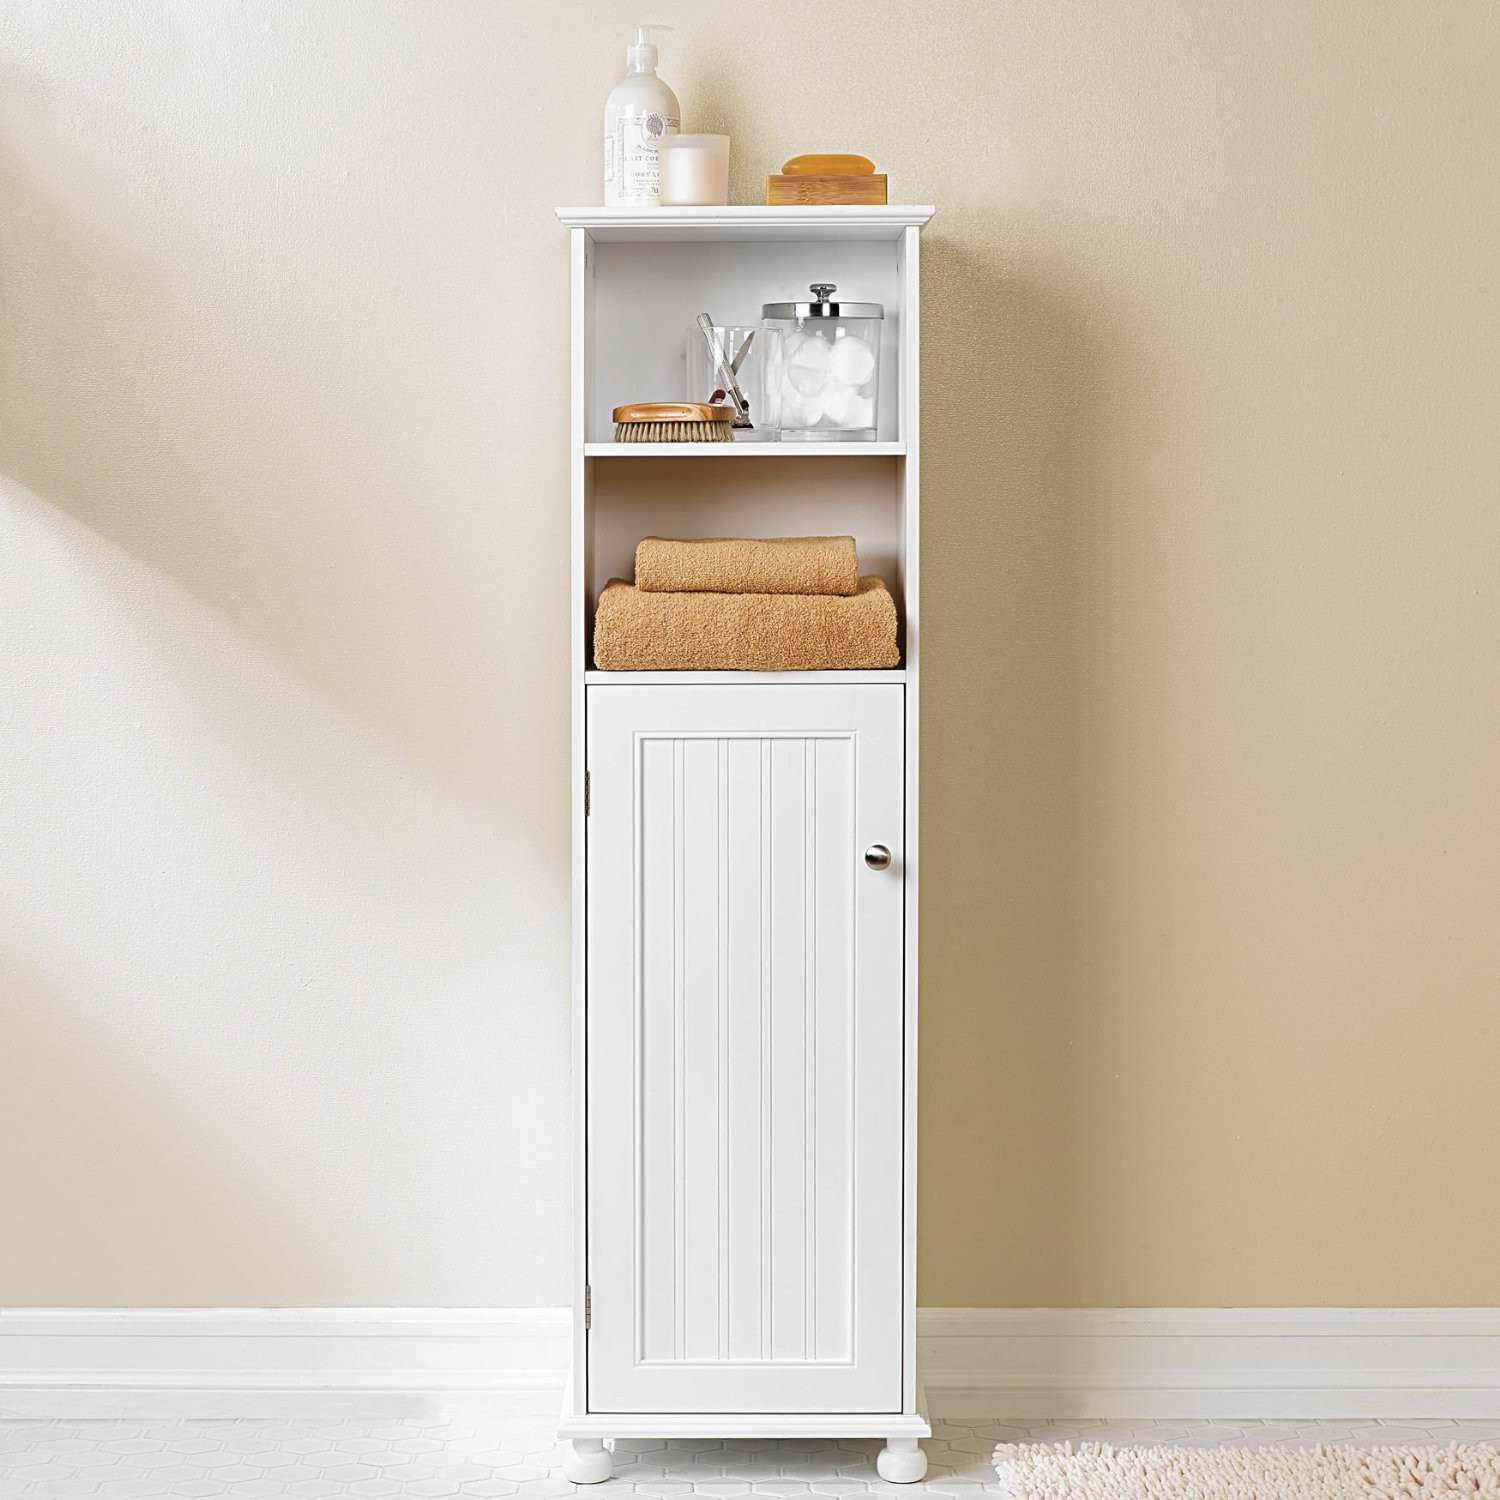 Bathroom Furniture Storage
 Add Character to Your Home Interiors with Bathroom Storage